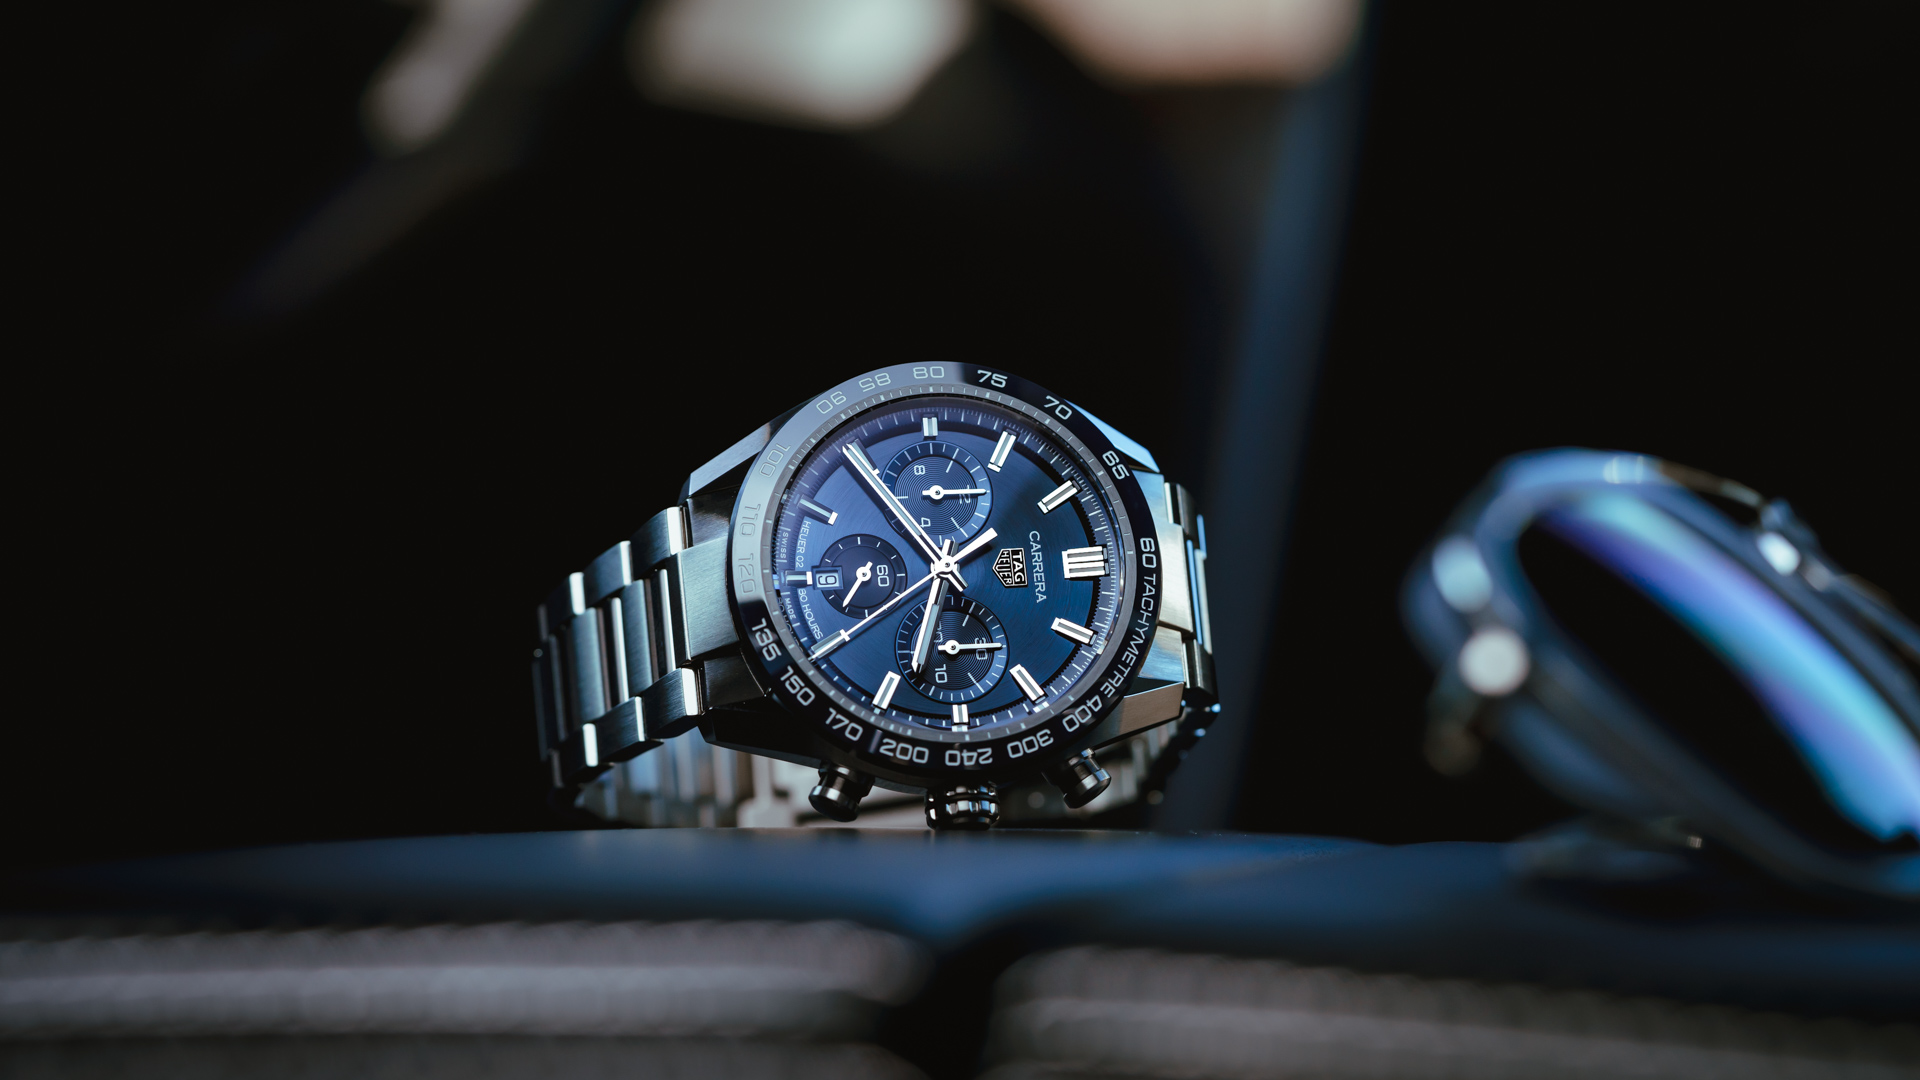 How The TAG Heuer Carrera Sport Chronograph Finally Found Its Moment